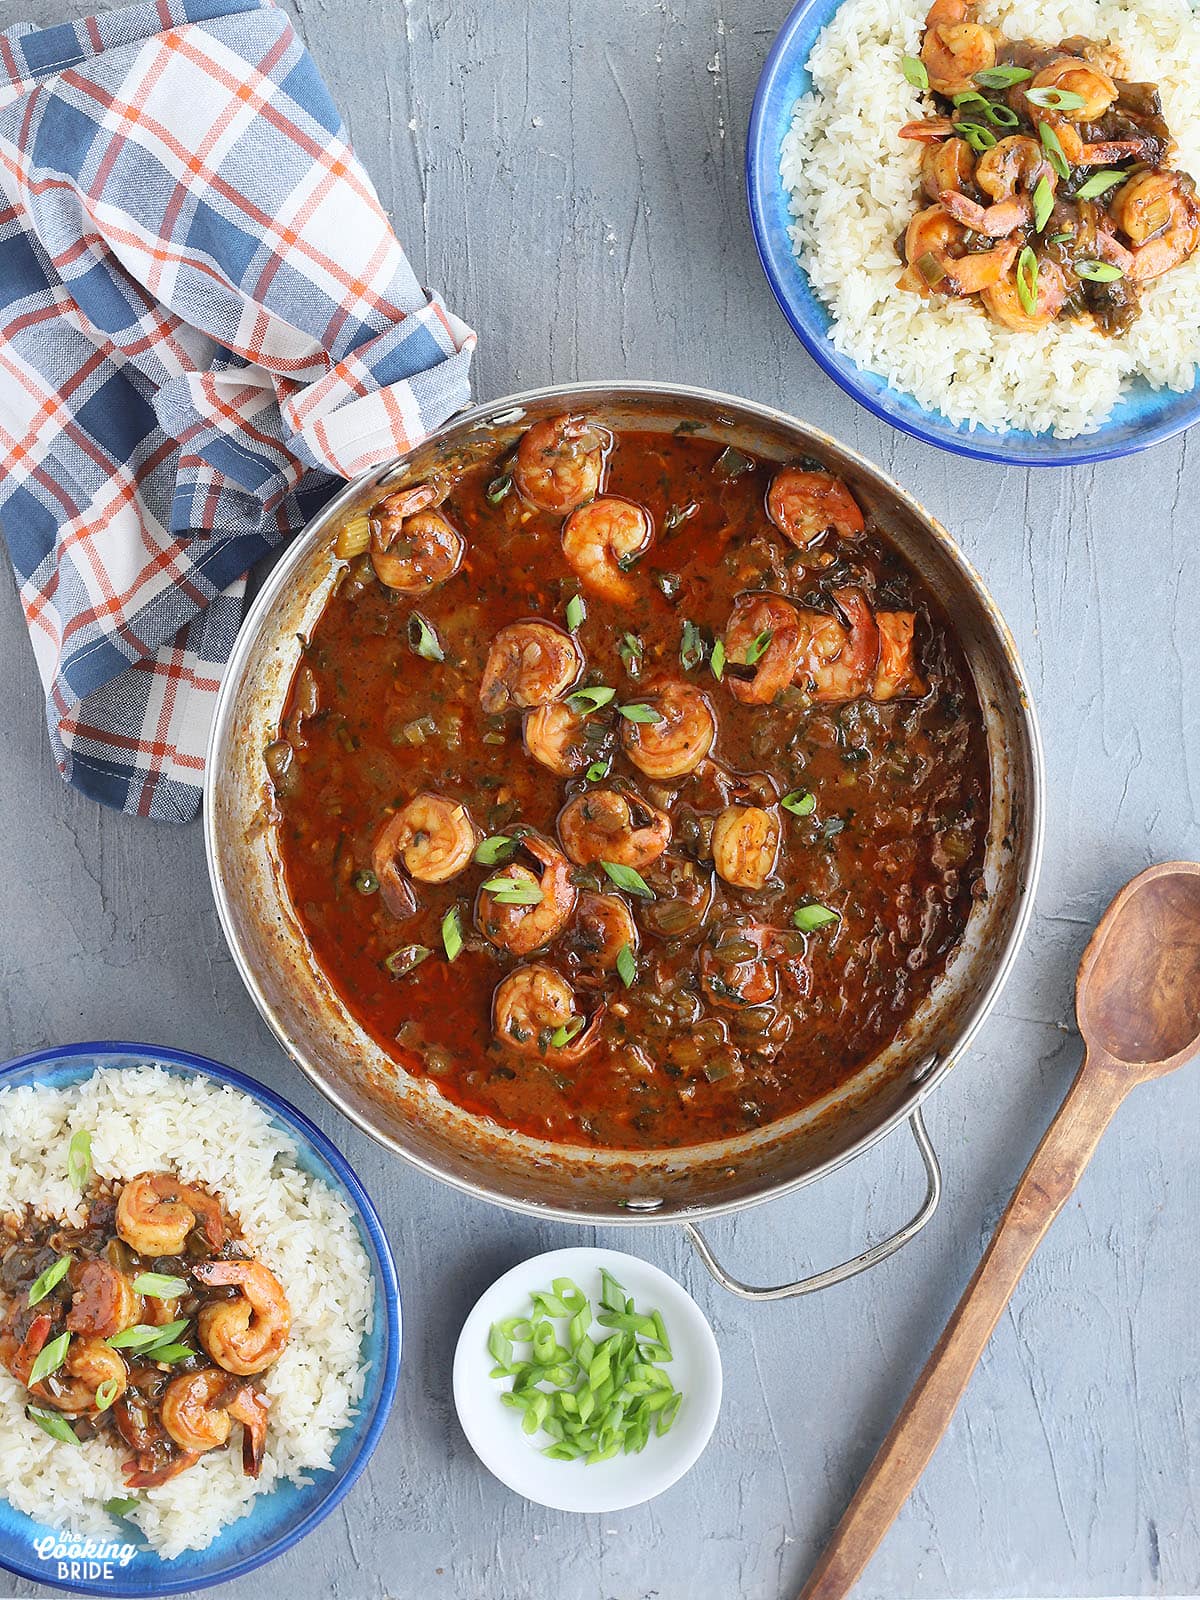 metal saucepan with cooked shrimp in gravy, two blue bowls of Cajun shrimp and rice garnished with green onions and a wooden serving spoon to the side